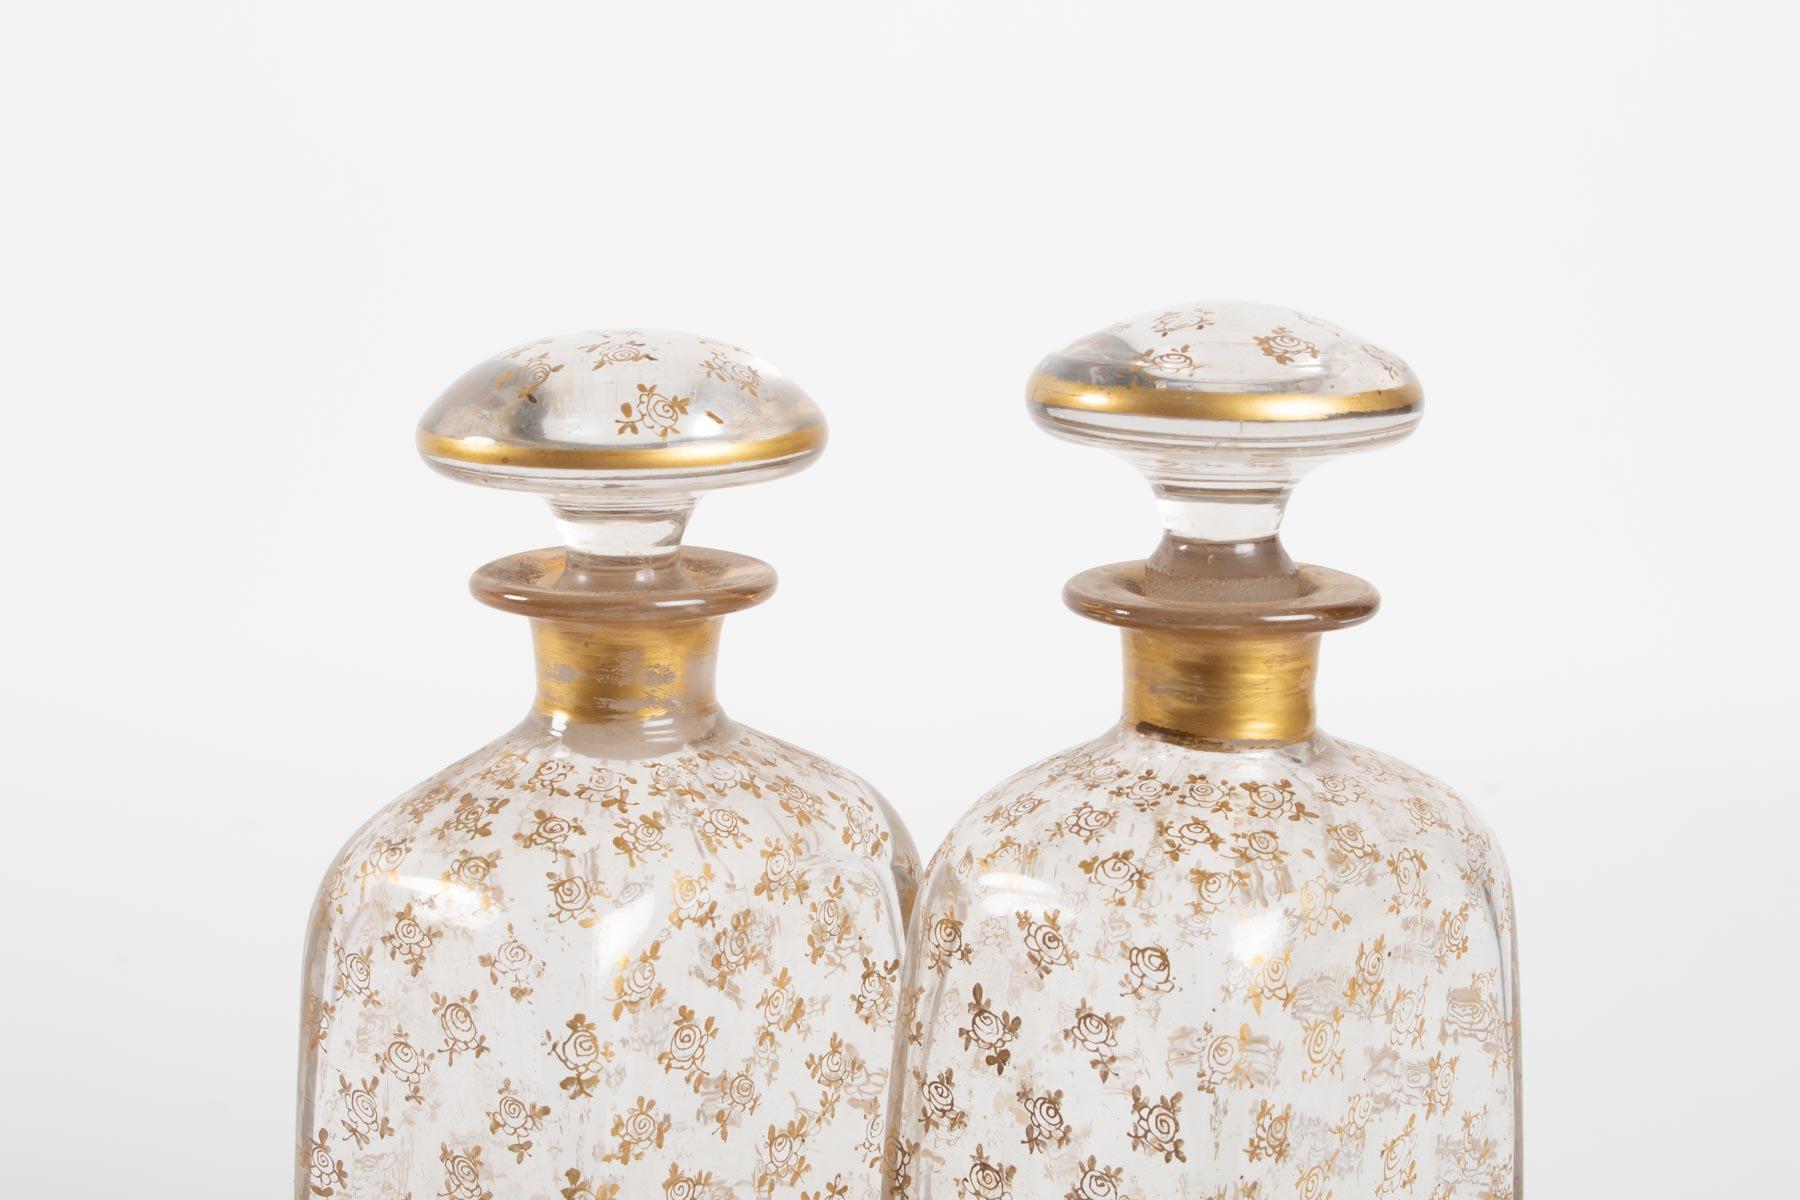 Pair of Glass Carafes, Decorated with Gold Patterns, Louis Philippe Period 4